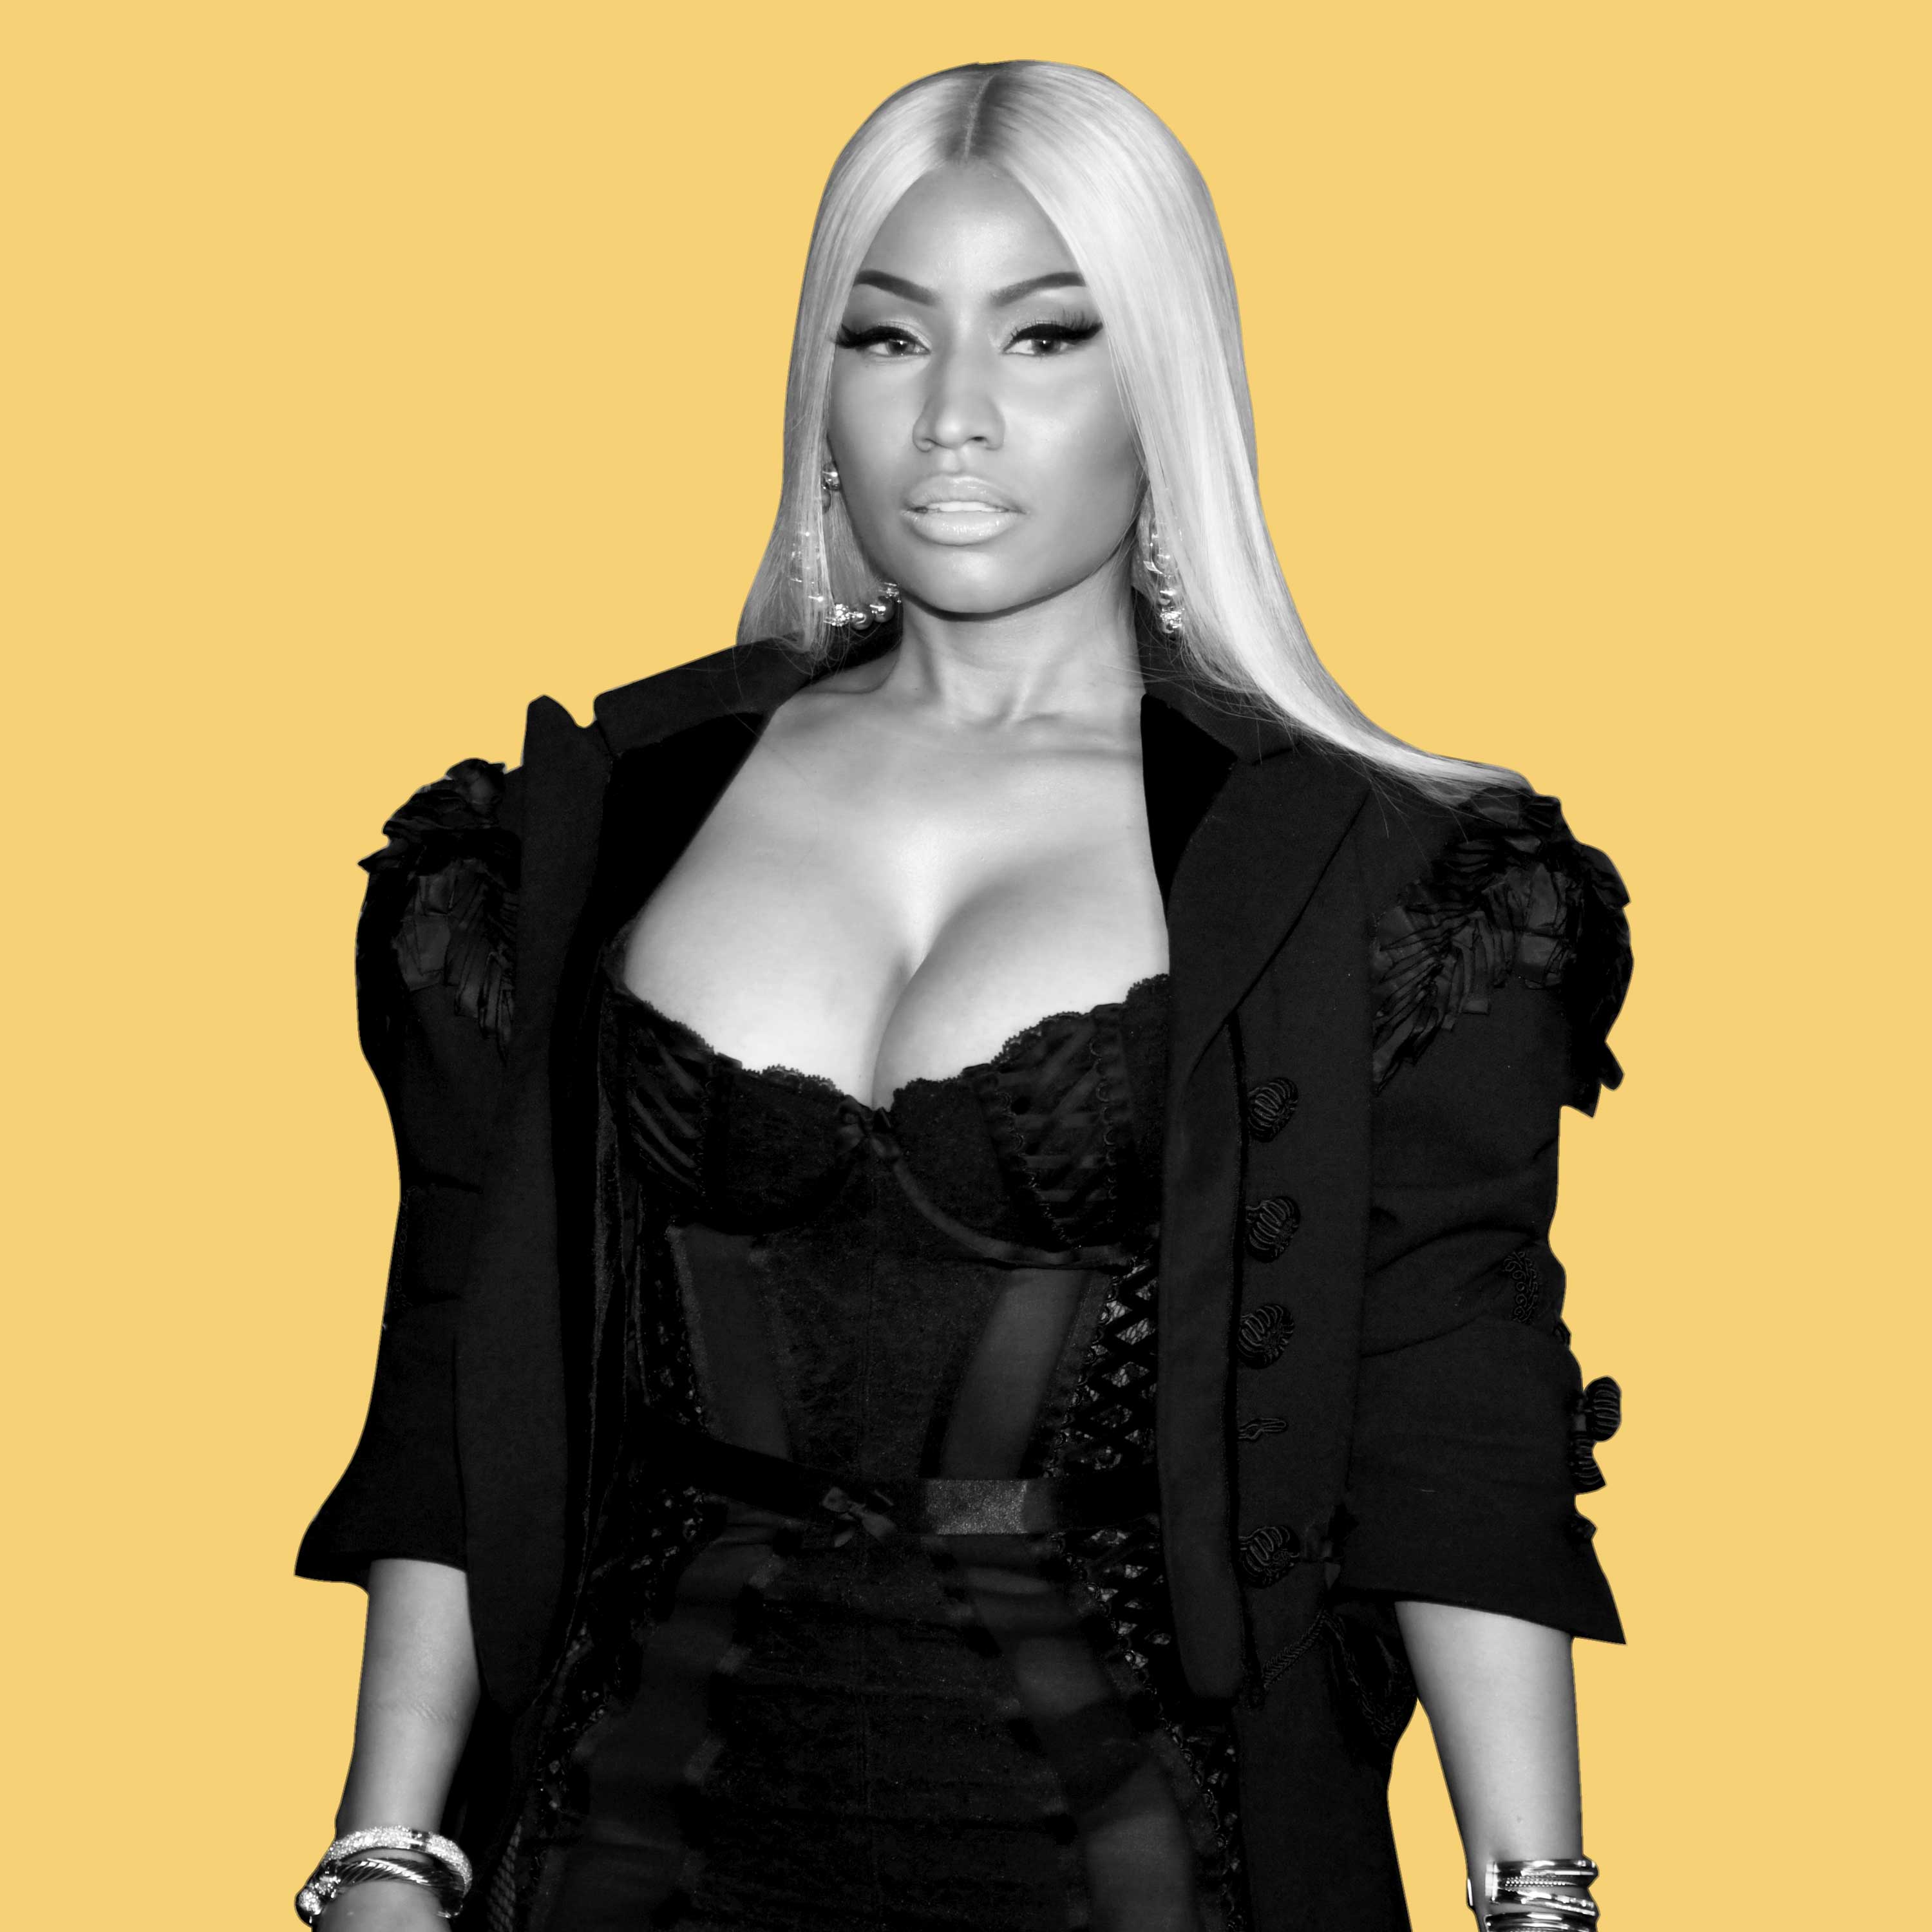 Nicki Minaj Is The Only Woman On Forbes’ Highest Paid Hip-Hop Artists List